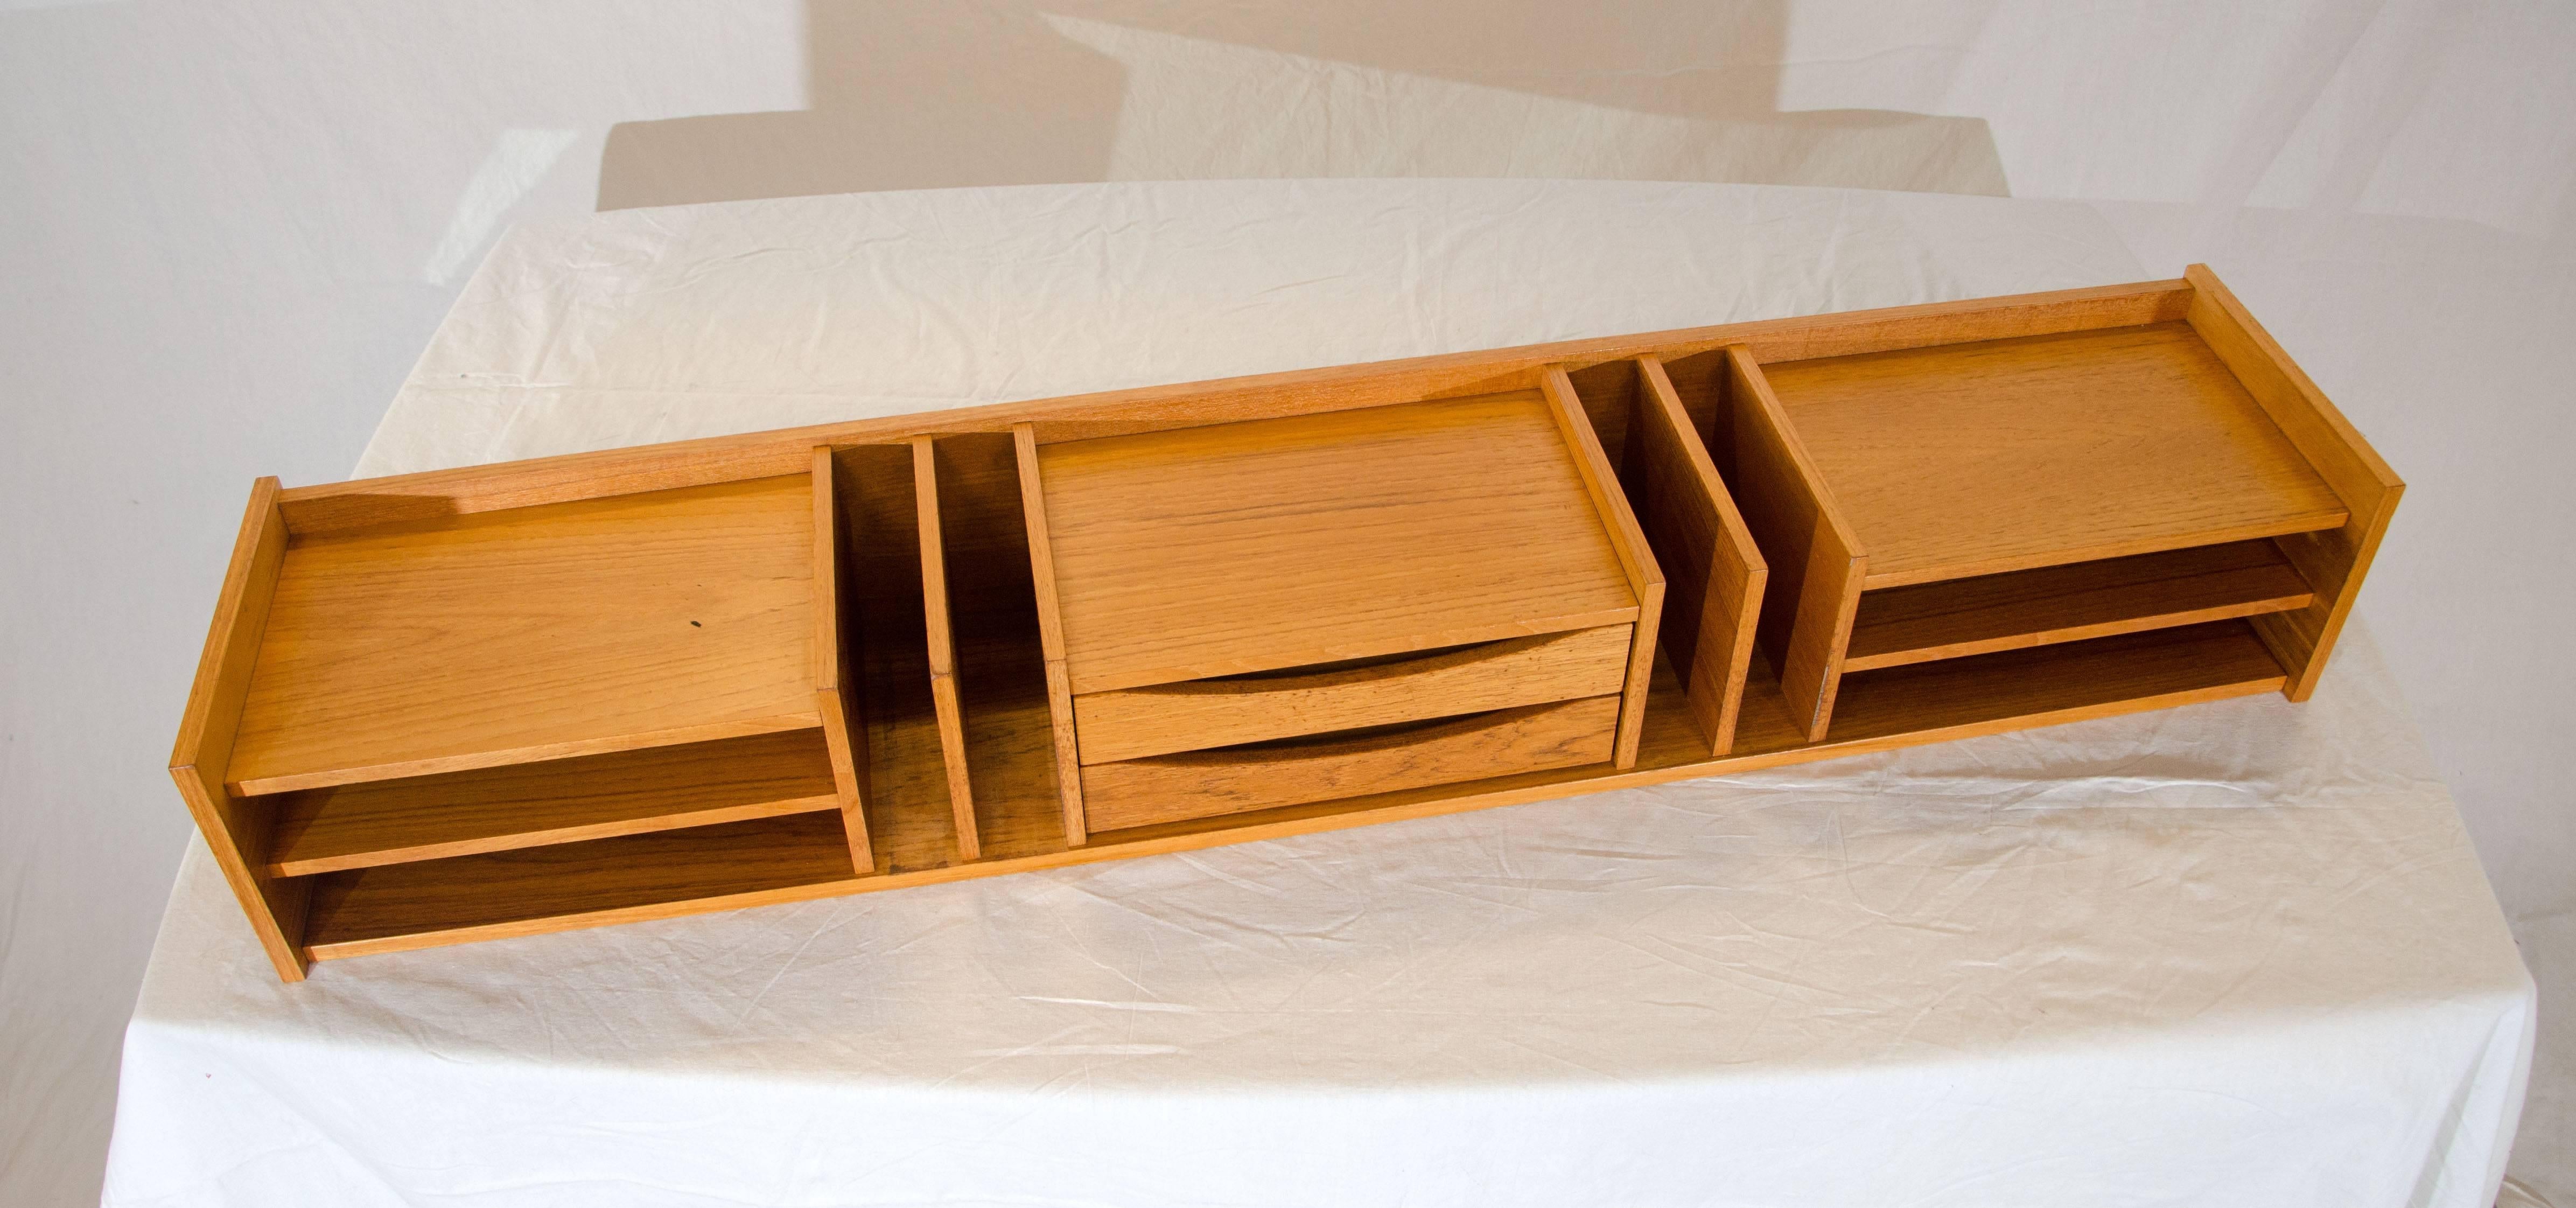  Larger size teak desk organizer with lots of cubbies as well as drawer space.
